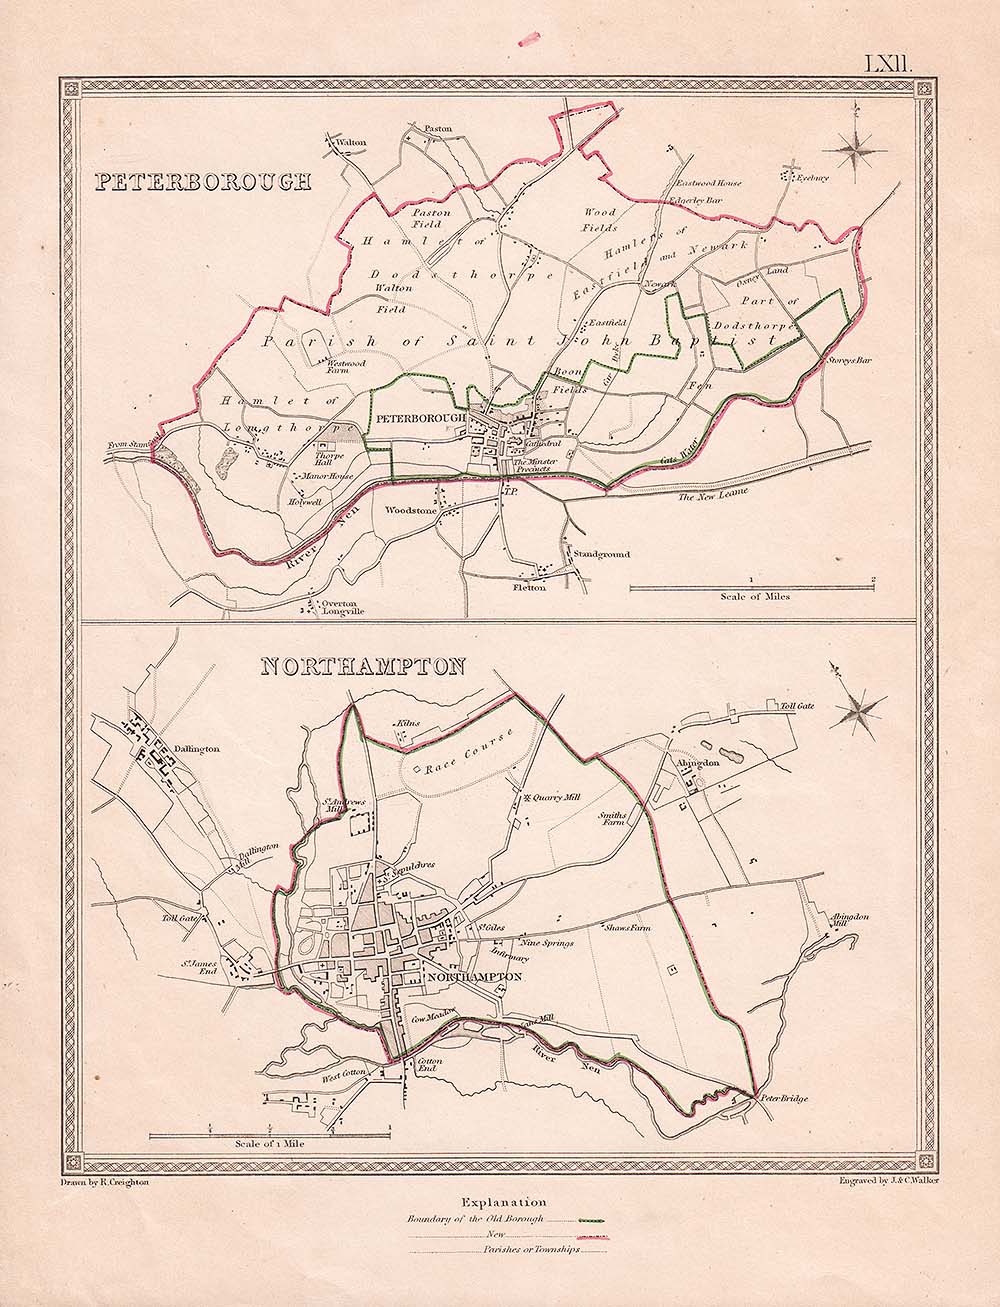 Town Plans of Peterborough and Northampton